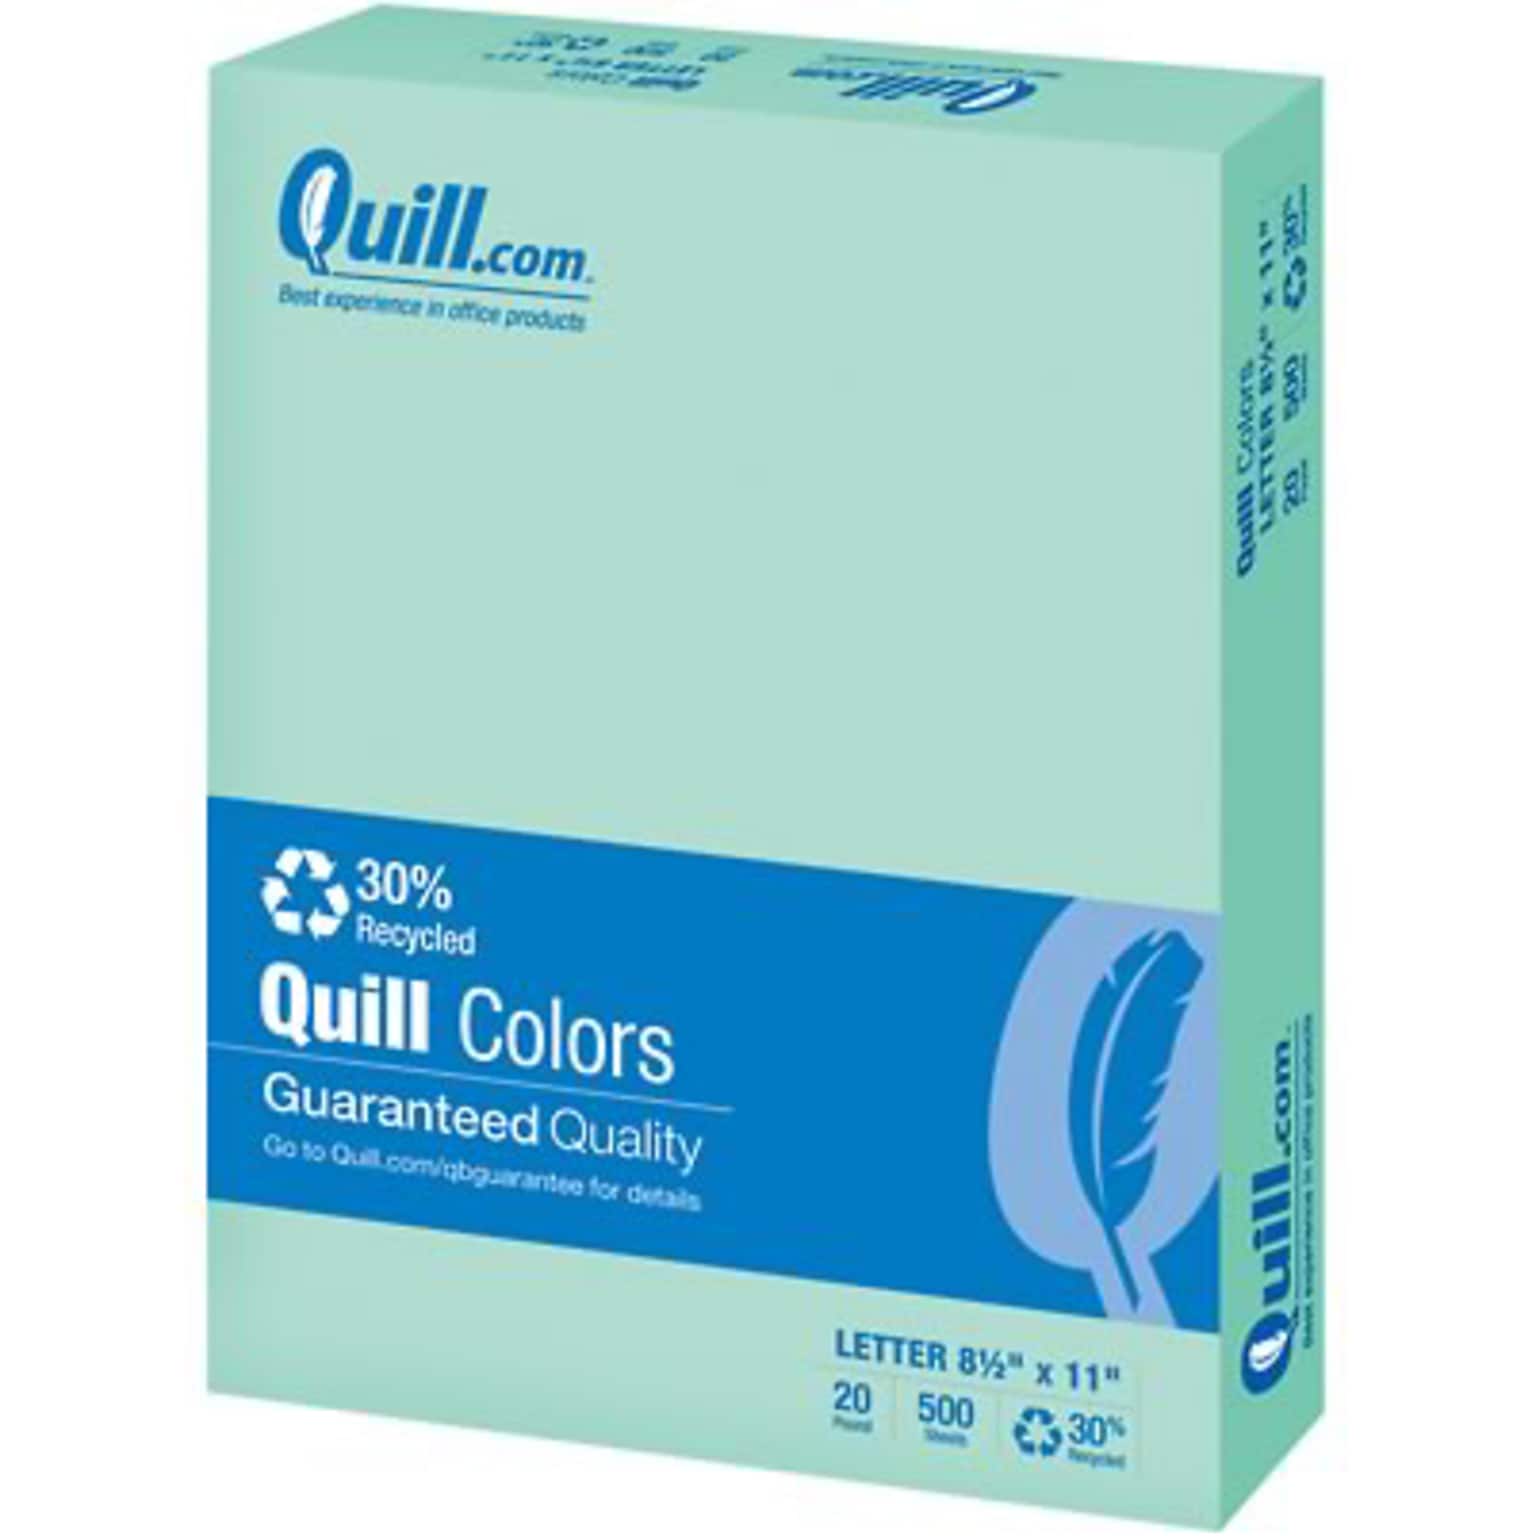 Quill Brand® 30% Recycled Colored Multipurpose Paper, 20 lbs., 8.5 x 11, Green, 500 sheets/Ream